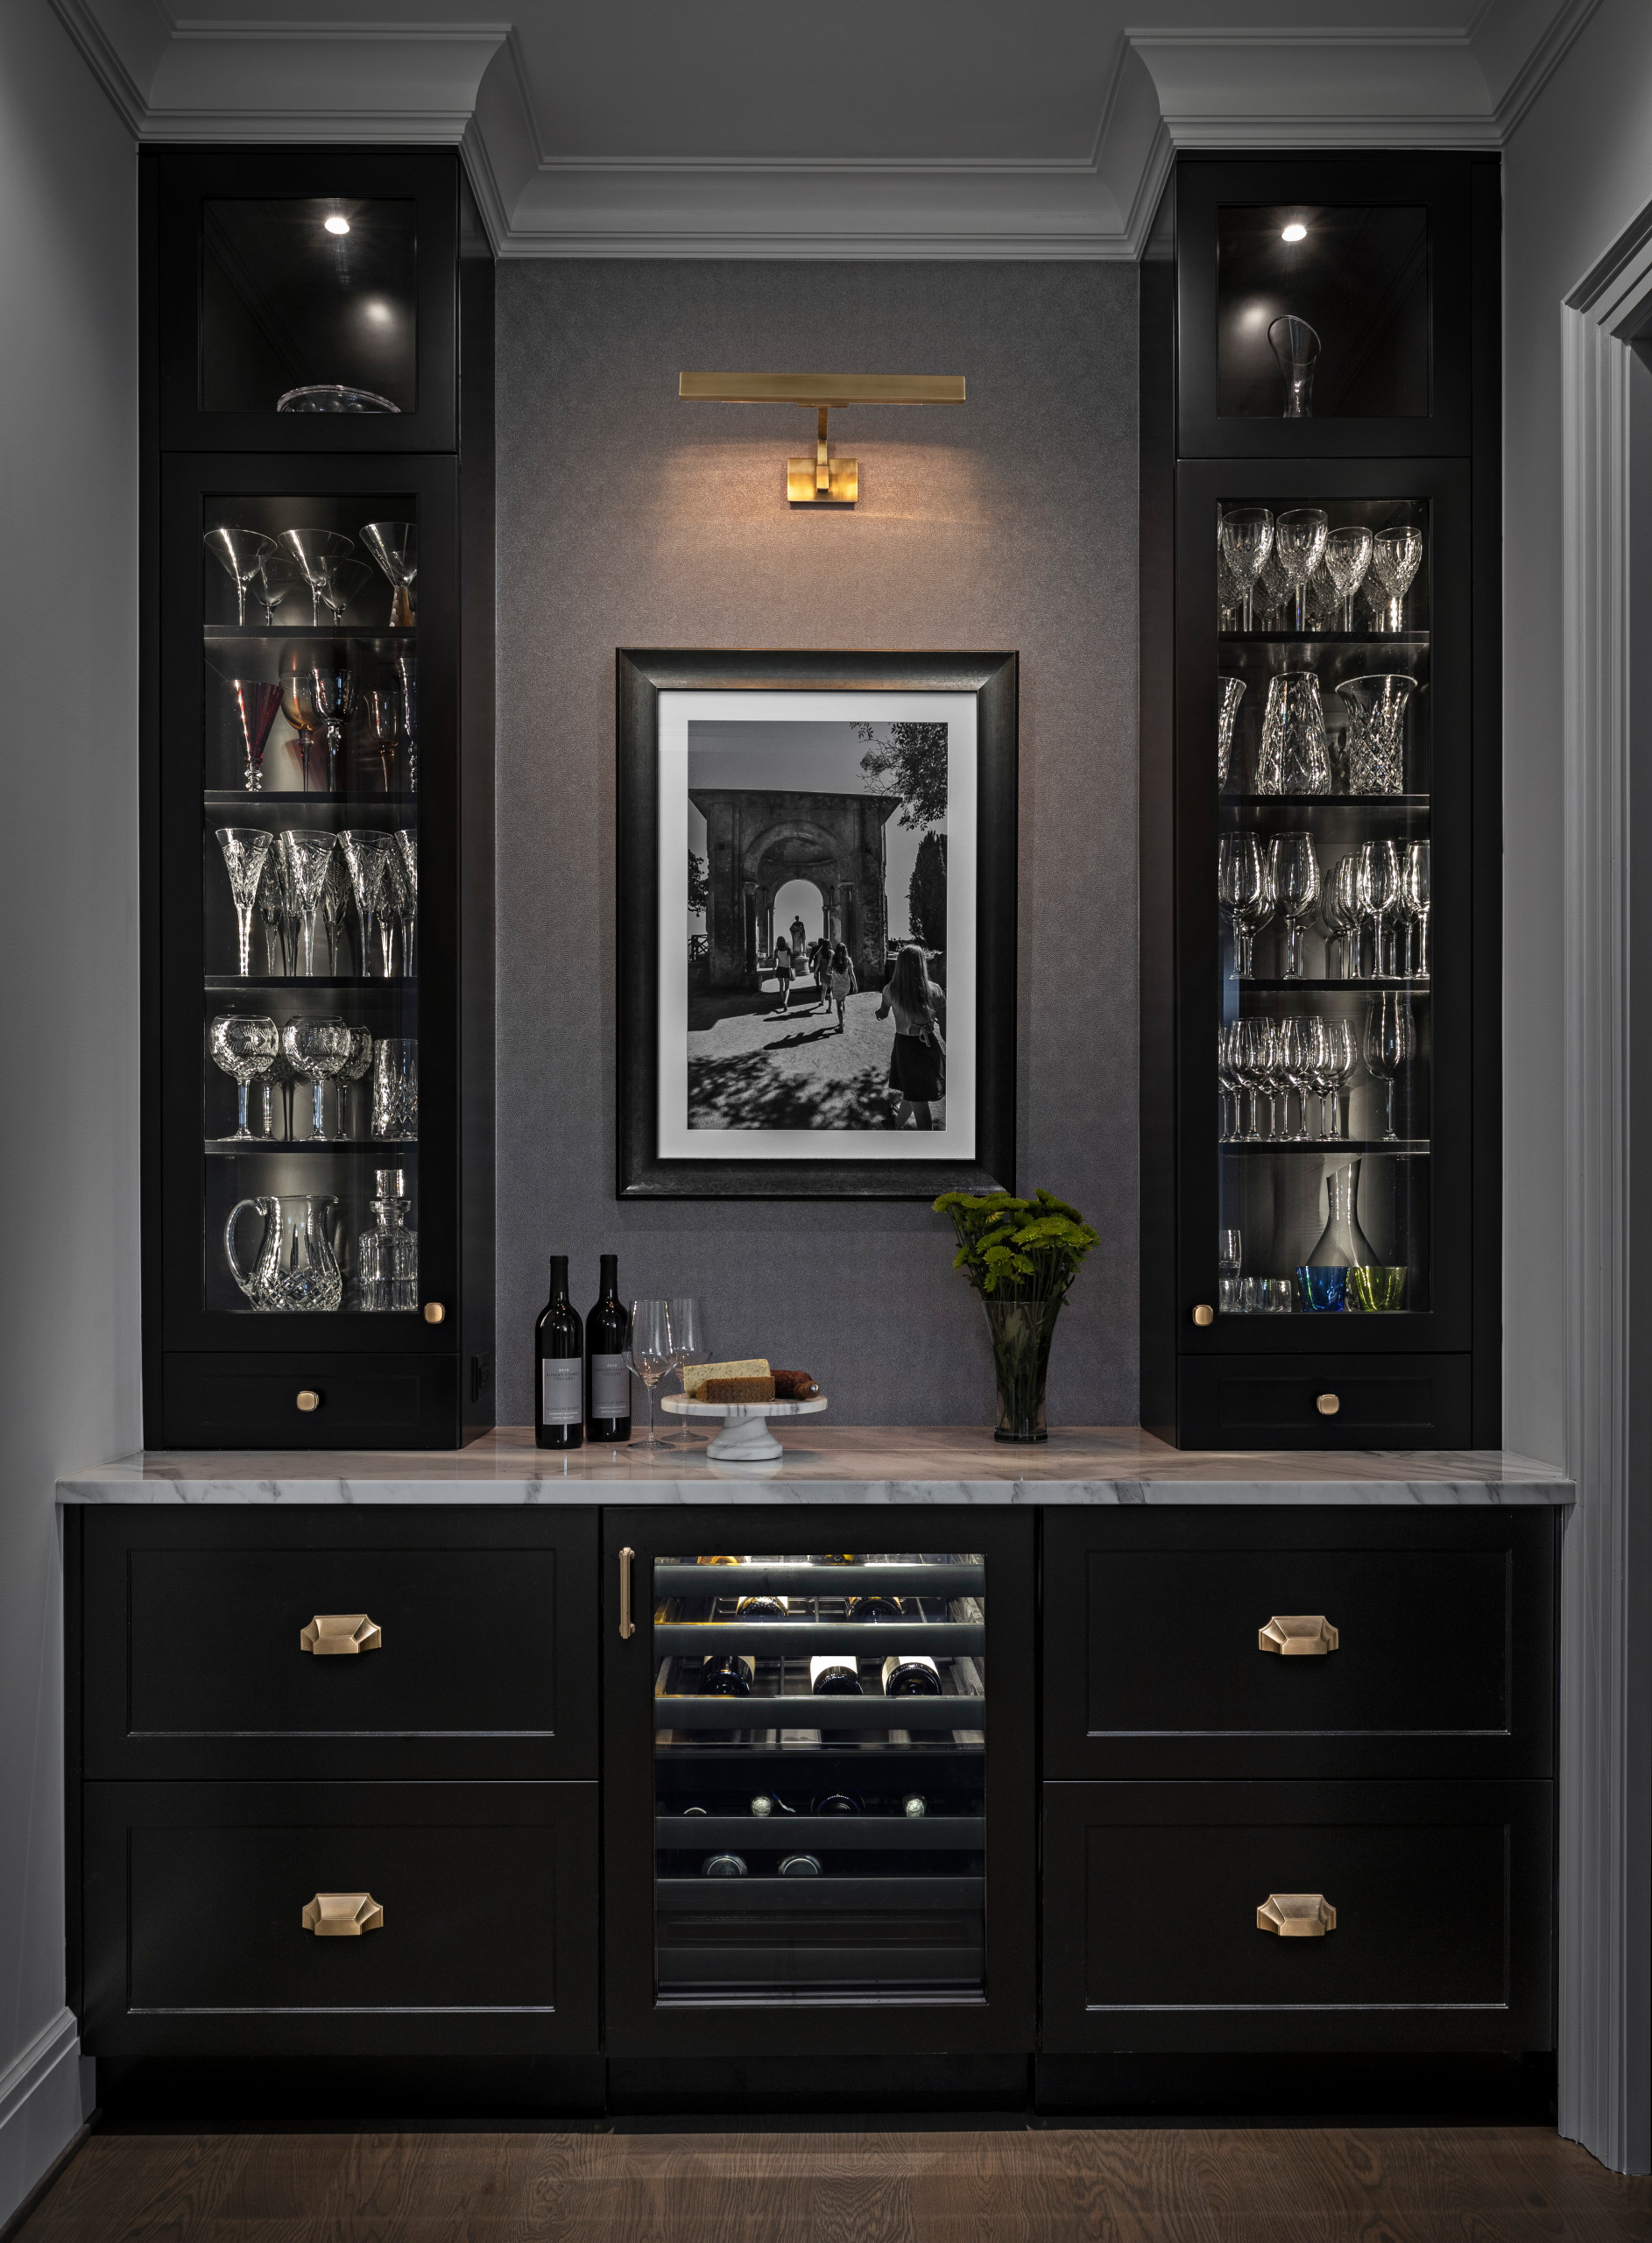 What makes a smaller space shine? In this Butler’s Pantry, our gorgeous dark shaker cabinets frame the view. Wallpaper with texture and a picture light play off the dramatic hardware to give some glam